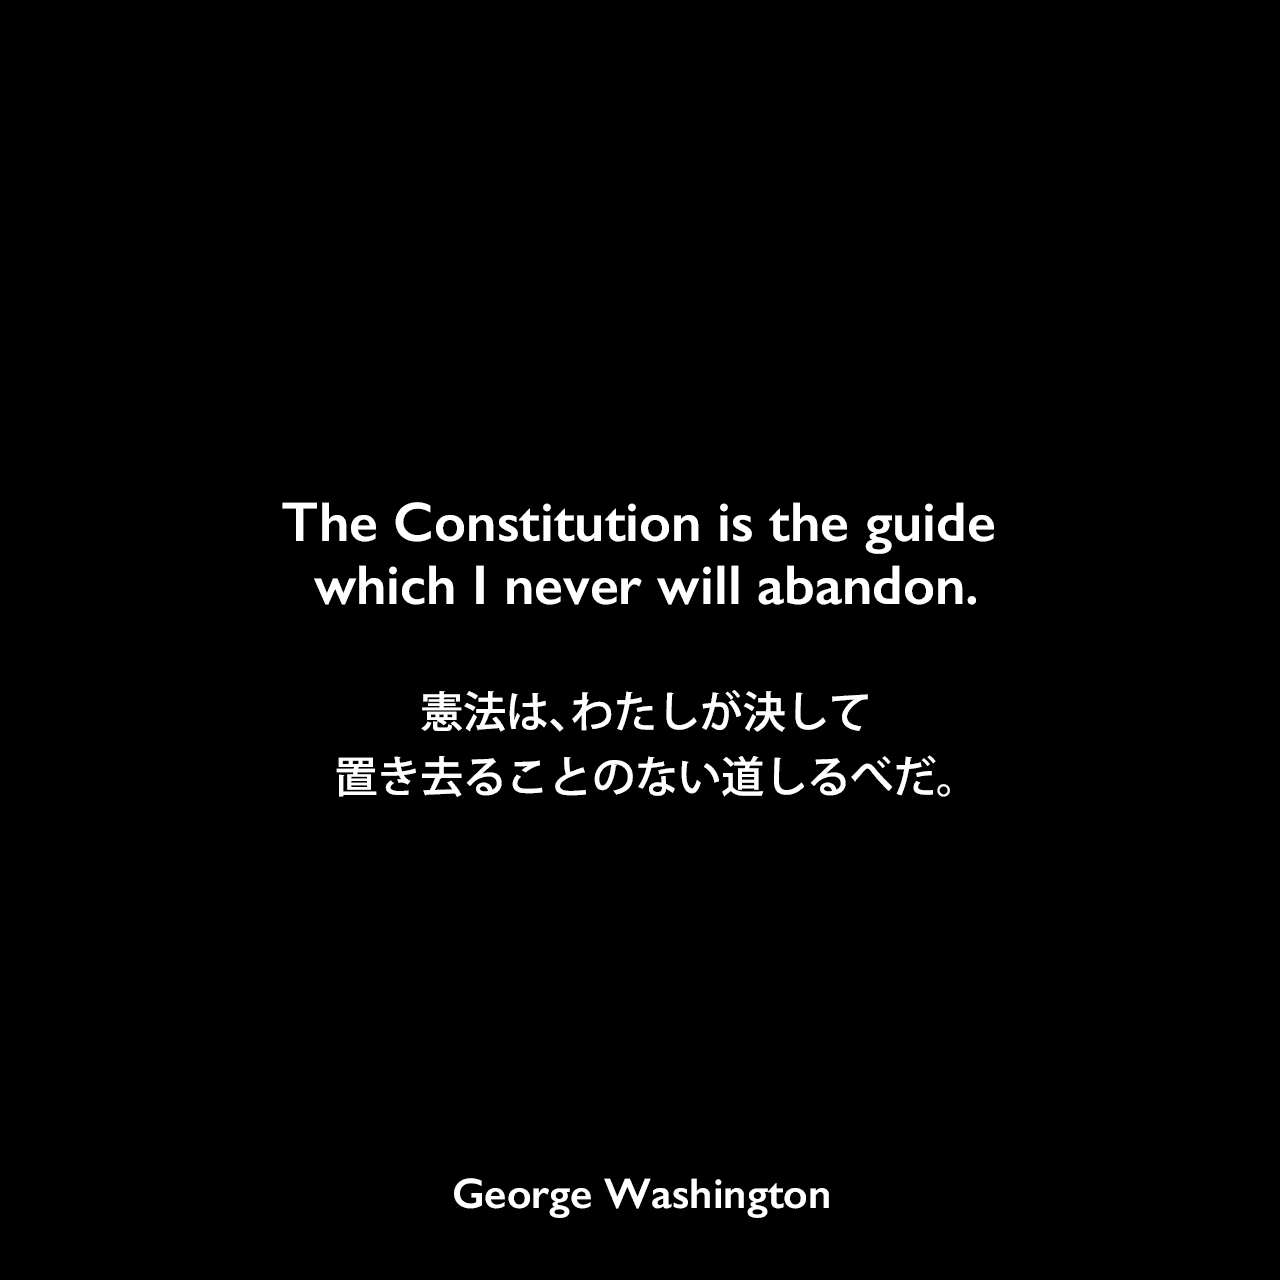 The Constitution is the guide which I never will abandon.憲法は、わたしが決して置き去ることのない道しるべだ。George Washington